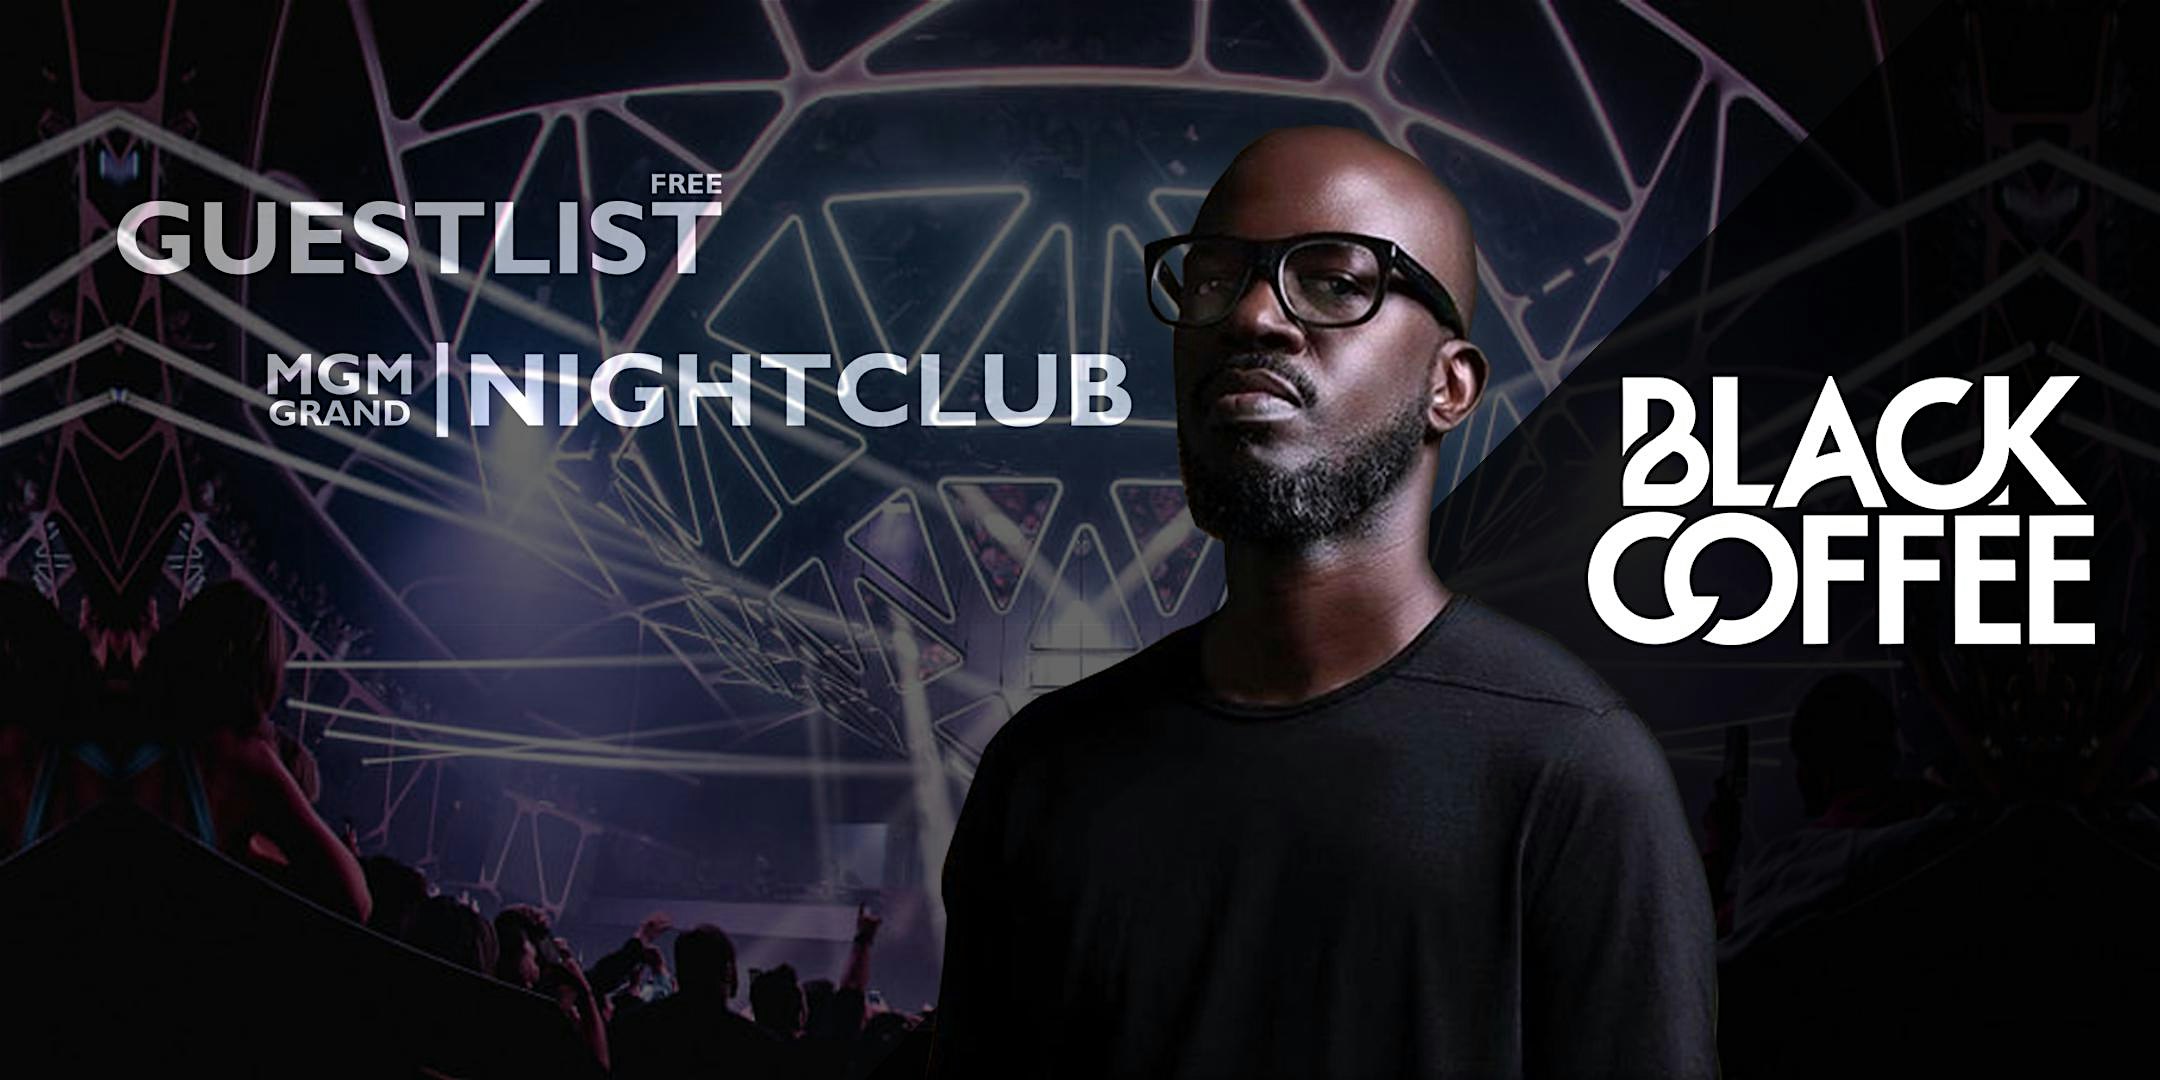 HALLOWEEN WEEKEND: Party at MGM Grand - BLACK COFFEE [FREE GUESTLIST]